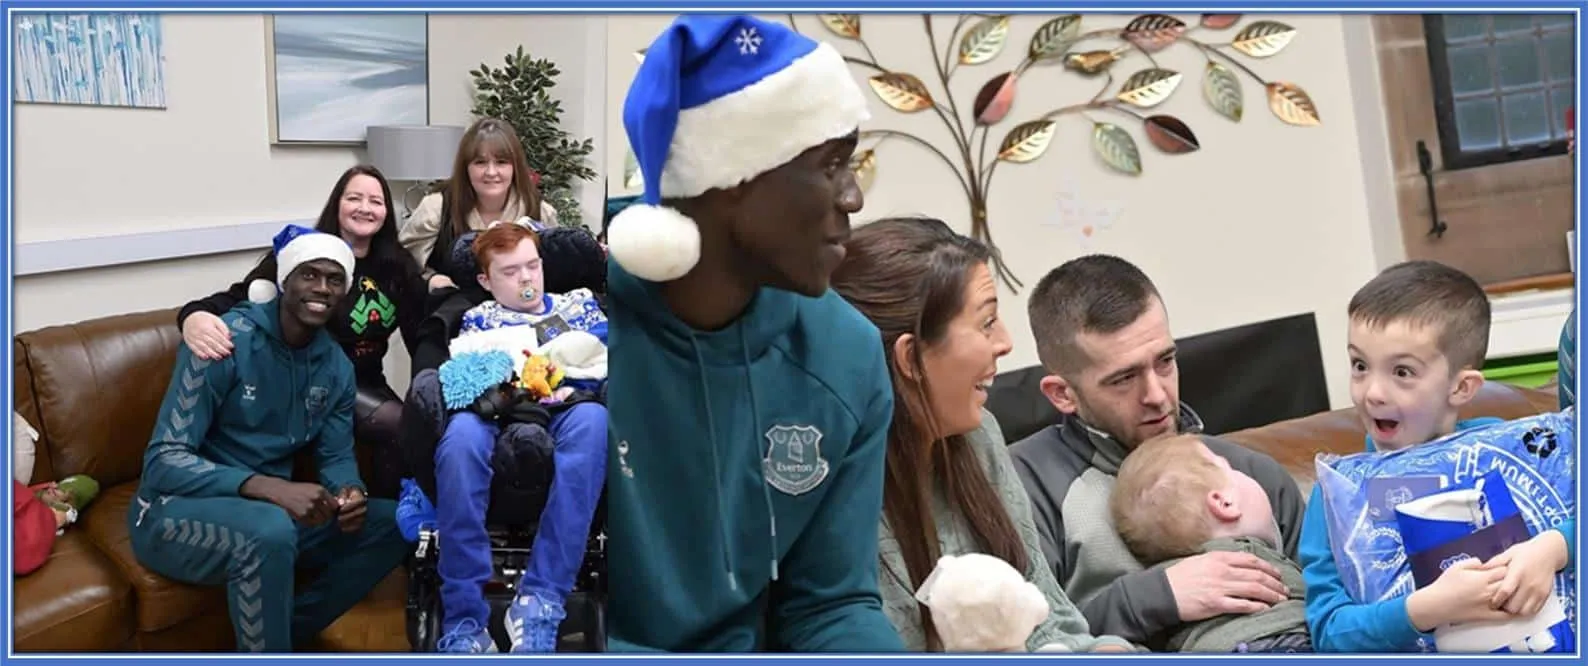 Kindness in Action: the Belgian takes time to visit supporters' families in Merseyside, demonstrating his gratitude and deep connection to the fans.